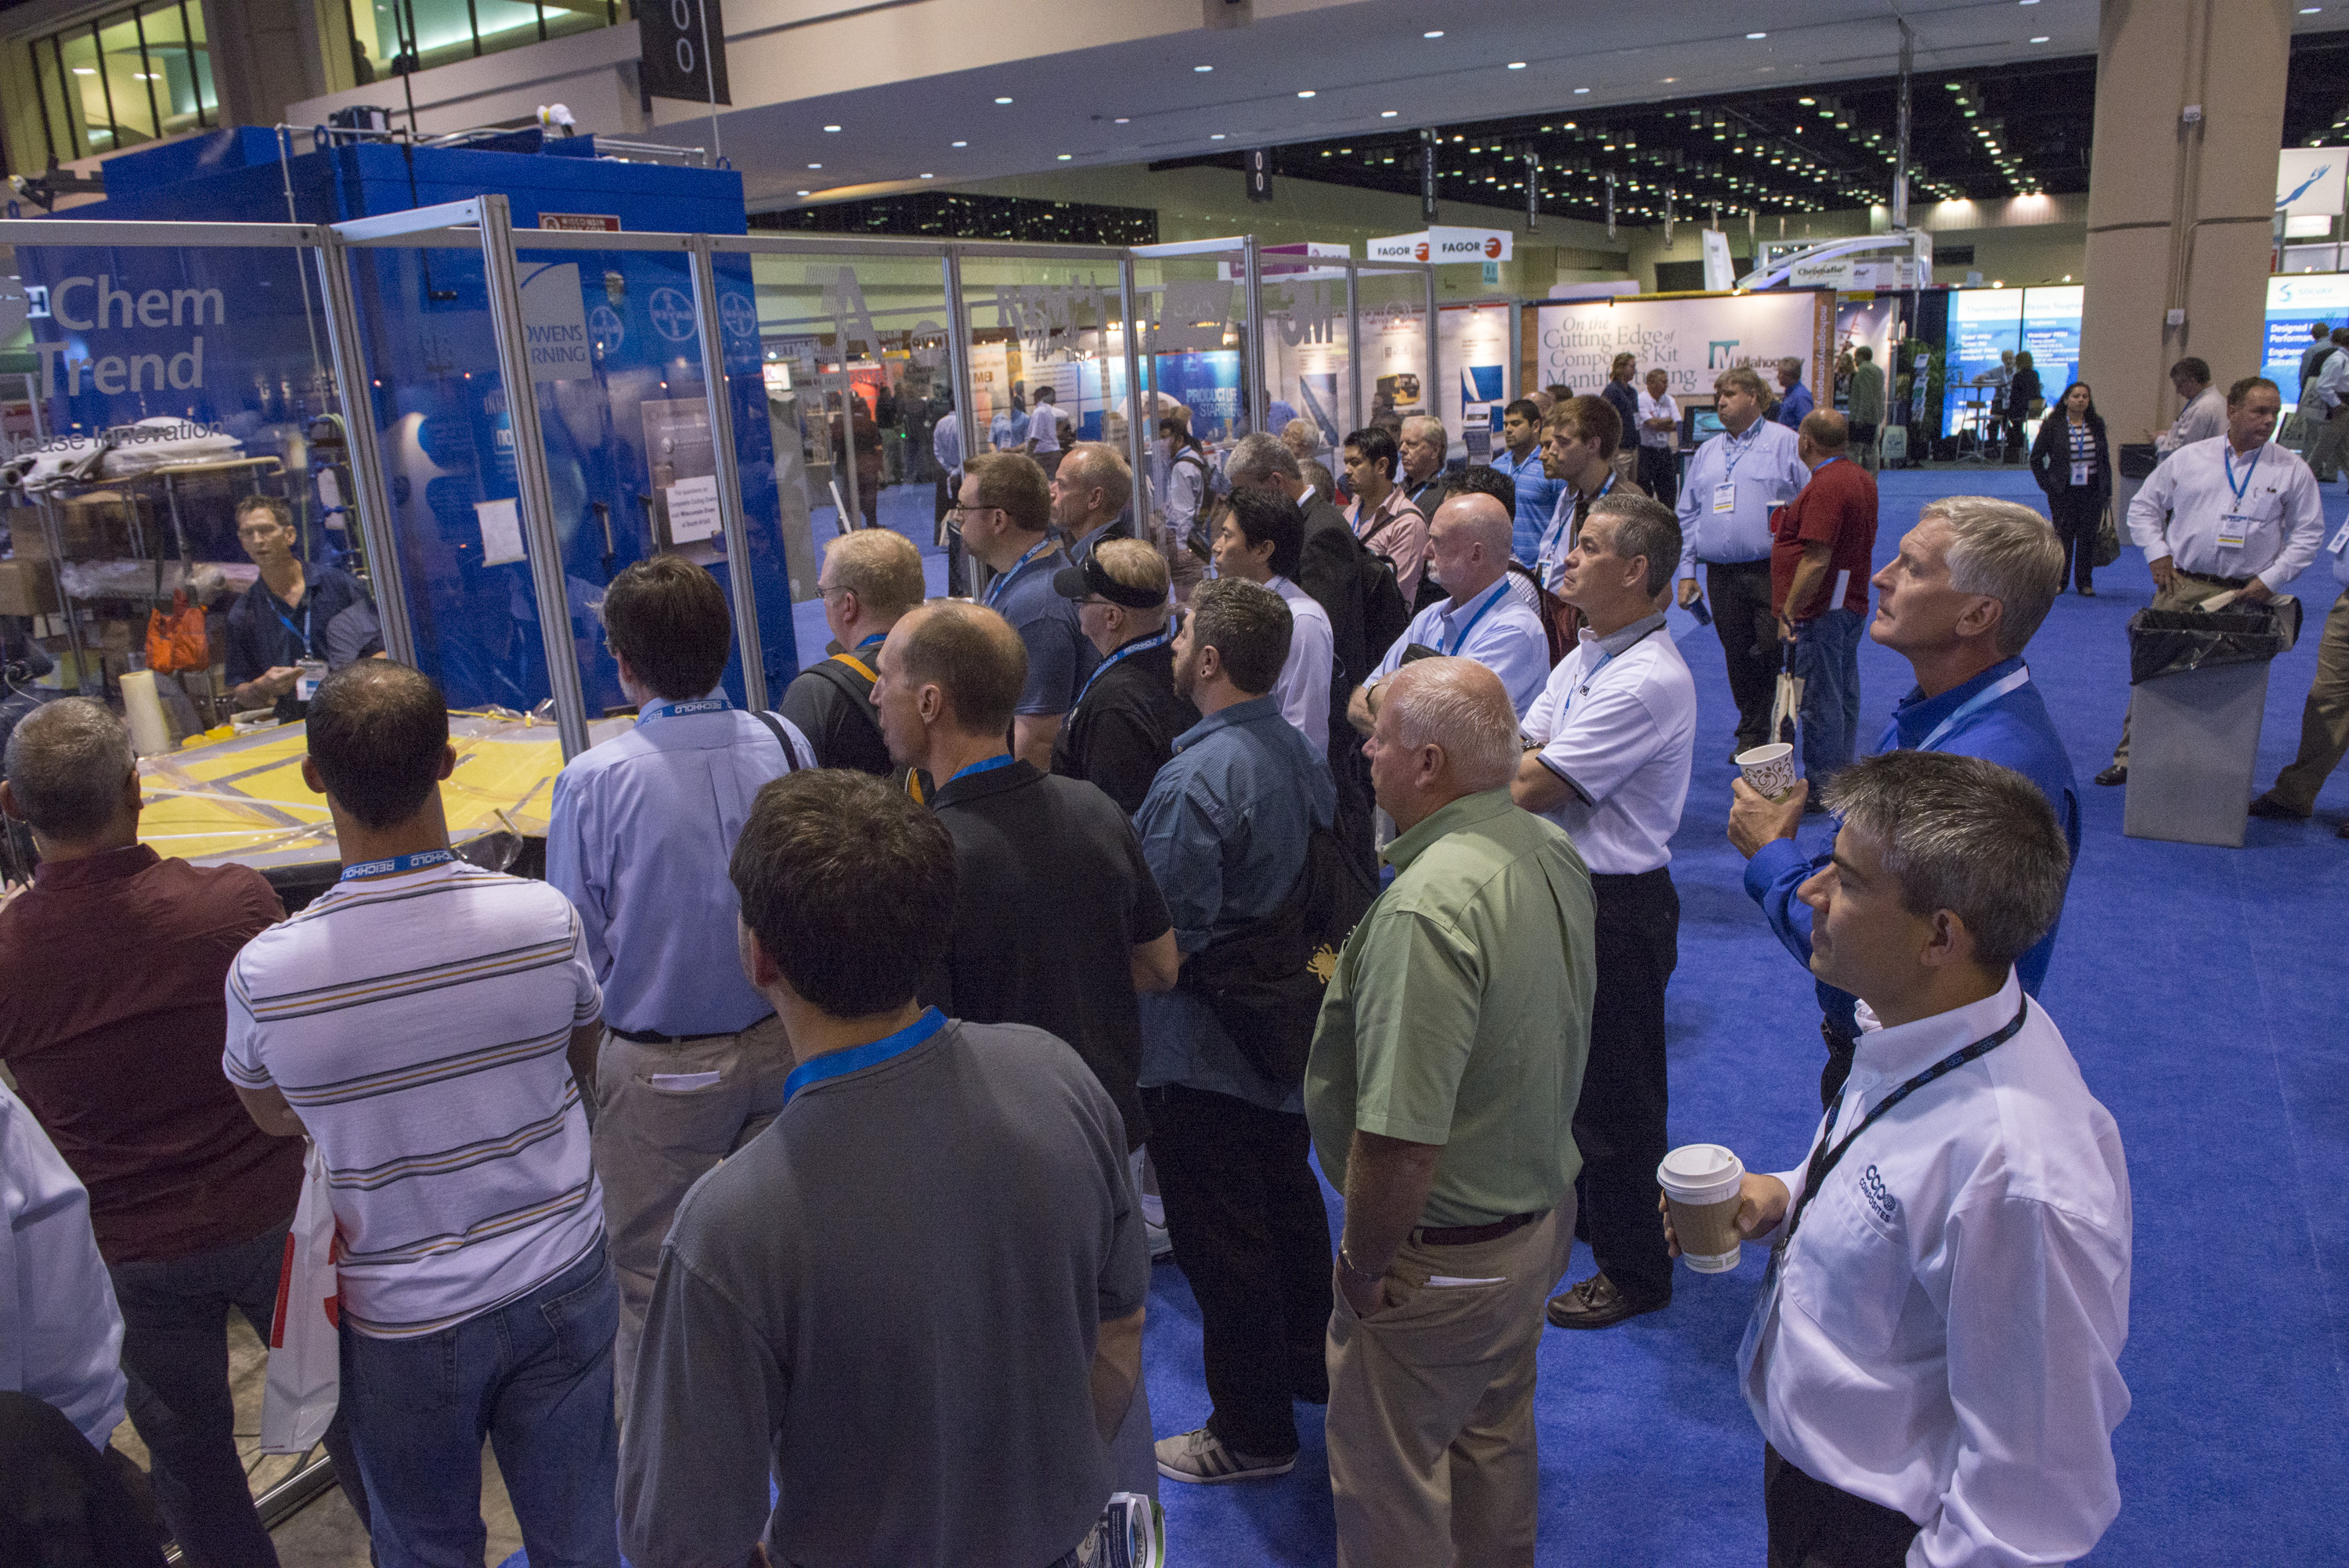 Composites One and the Closed Mold Alliance will be showing live demos of vacuum infusion, resin transfer molding (RTM) and other processes during the CAMX show.